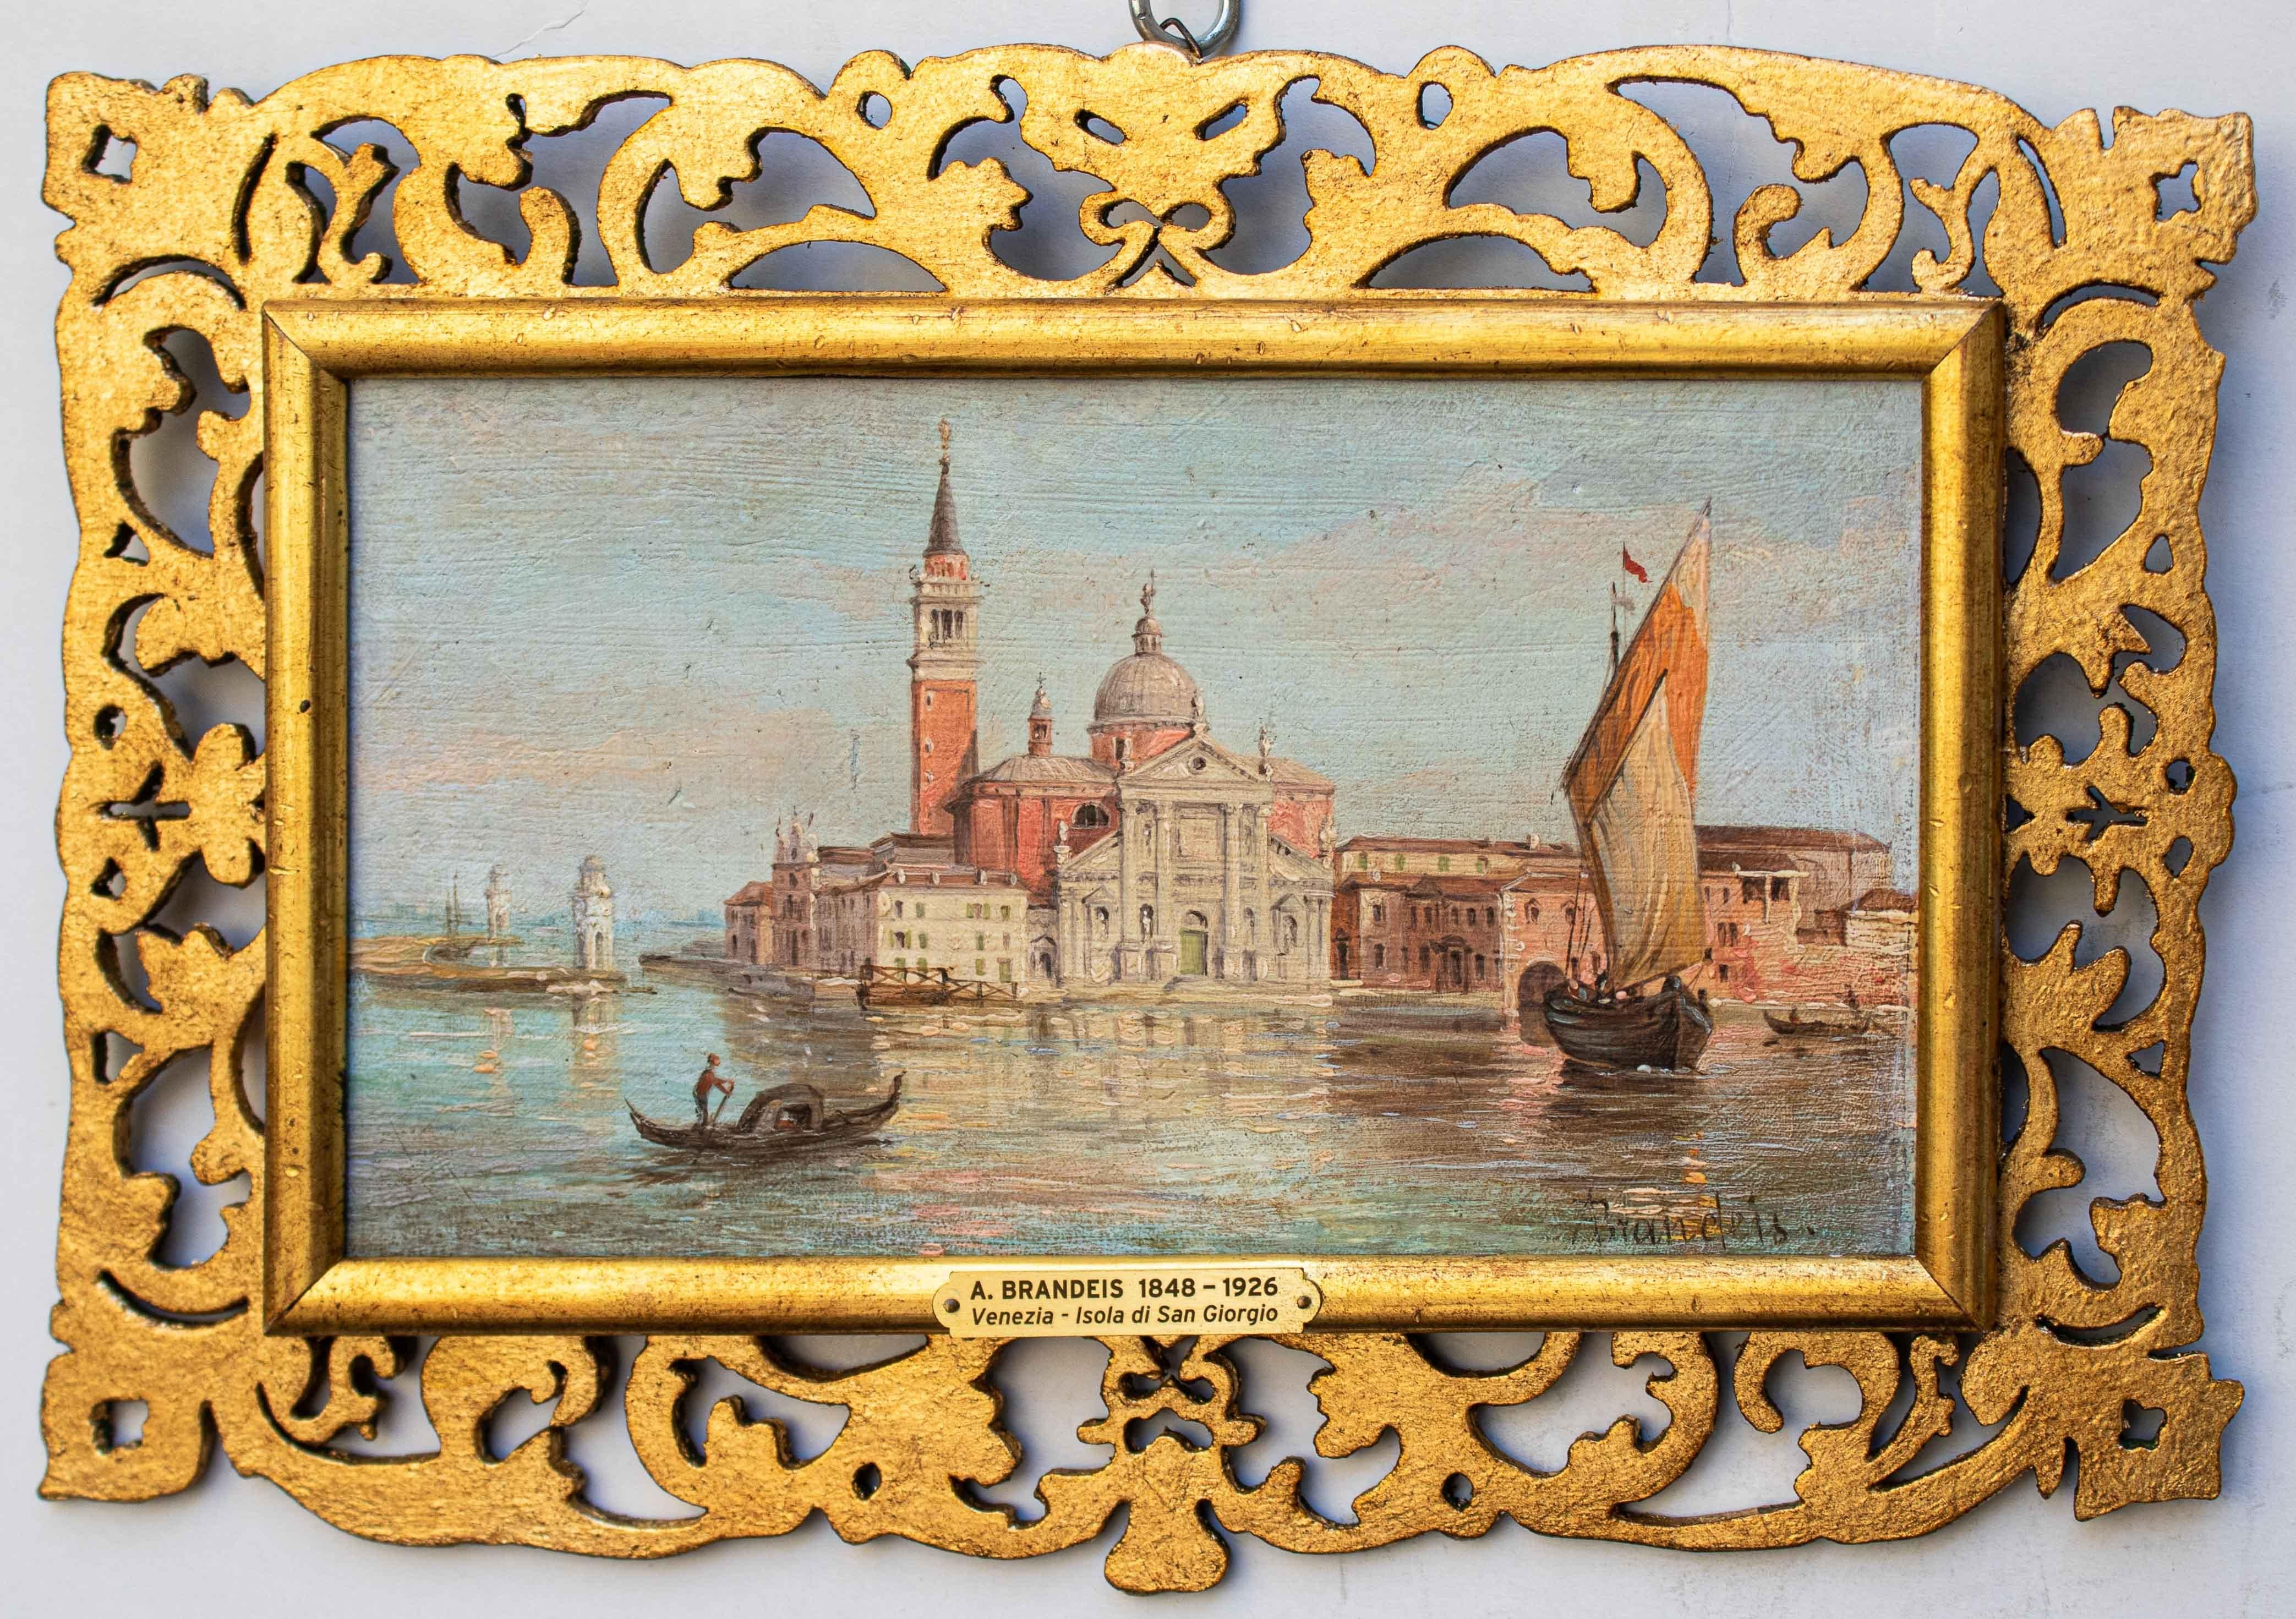 Antonietta Brandeis (Miskovice, January 13, 1848 - Florence, March 20, 1926)
View of San Giorgio
Oil on panel, 12.5 x 22.5 cm - Frame 14 x 24.5 cm
Signed ABrandeis lower left

The view of the island of San Giorgio, with the Palladian